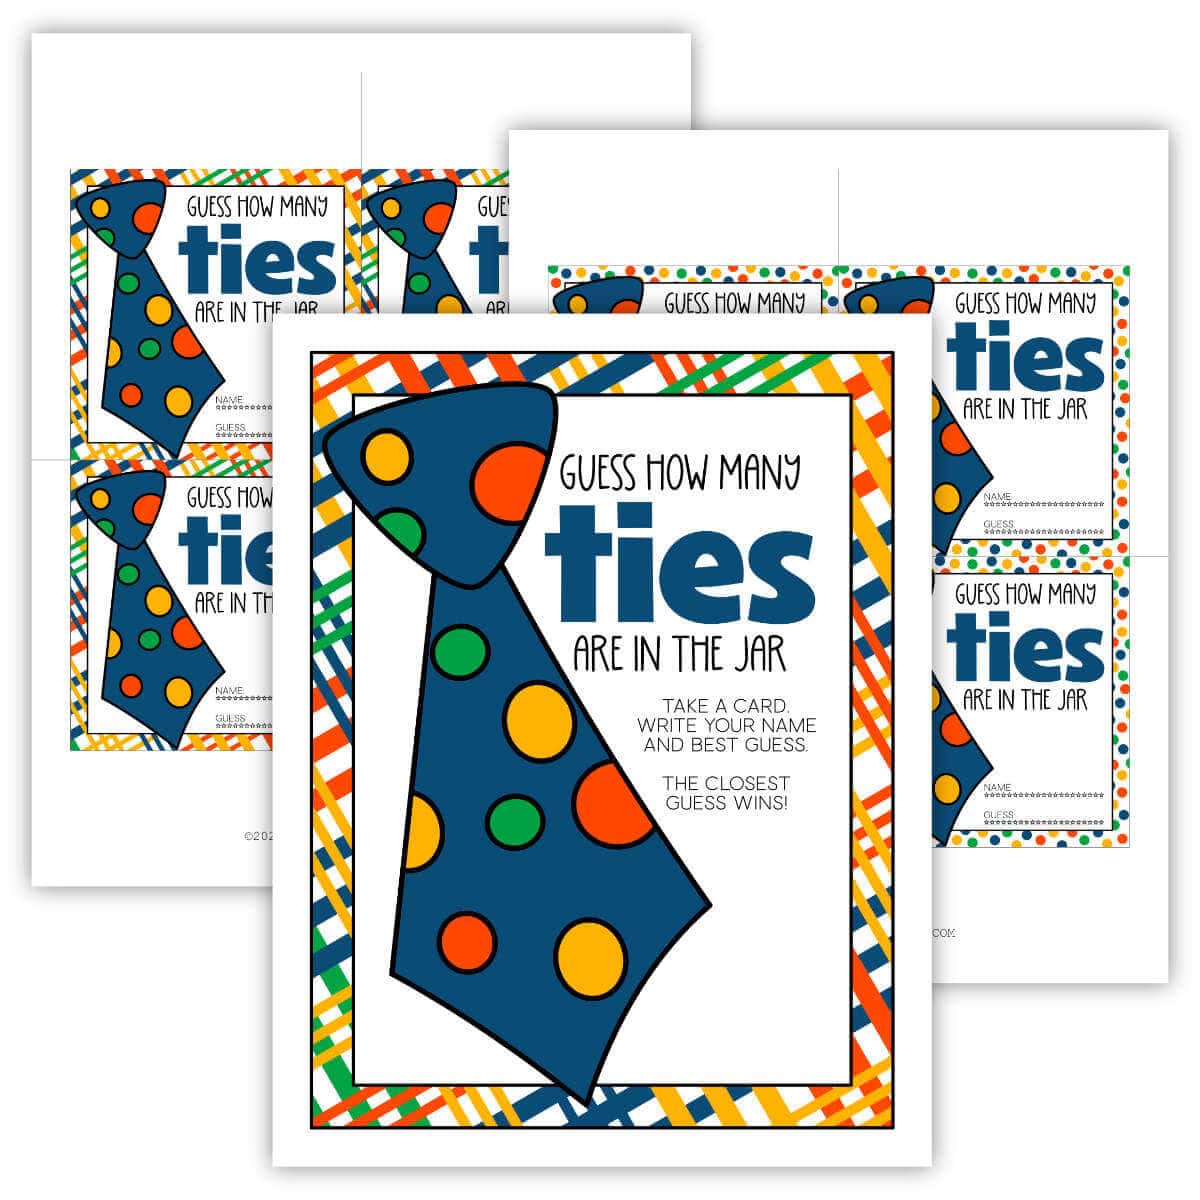 Guess How Many Ties Are In The Jar game printable sign with printable guess cards.